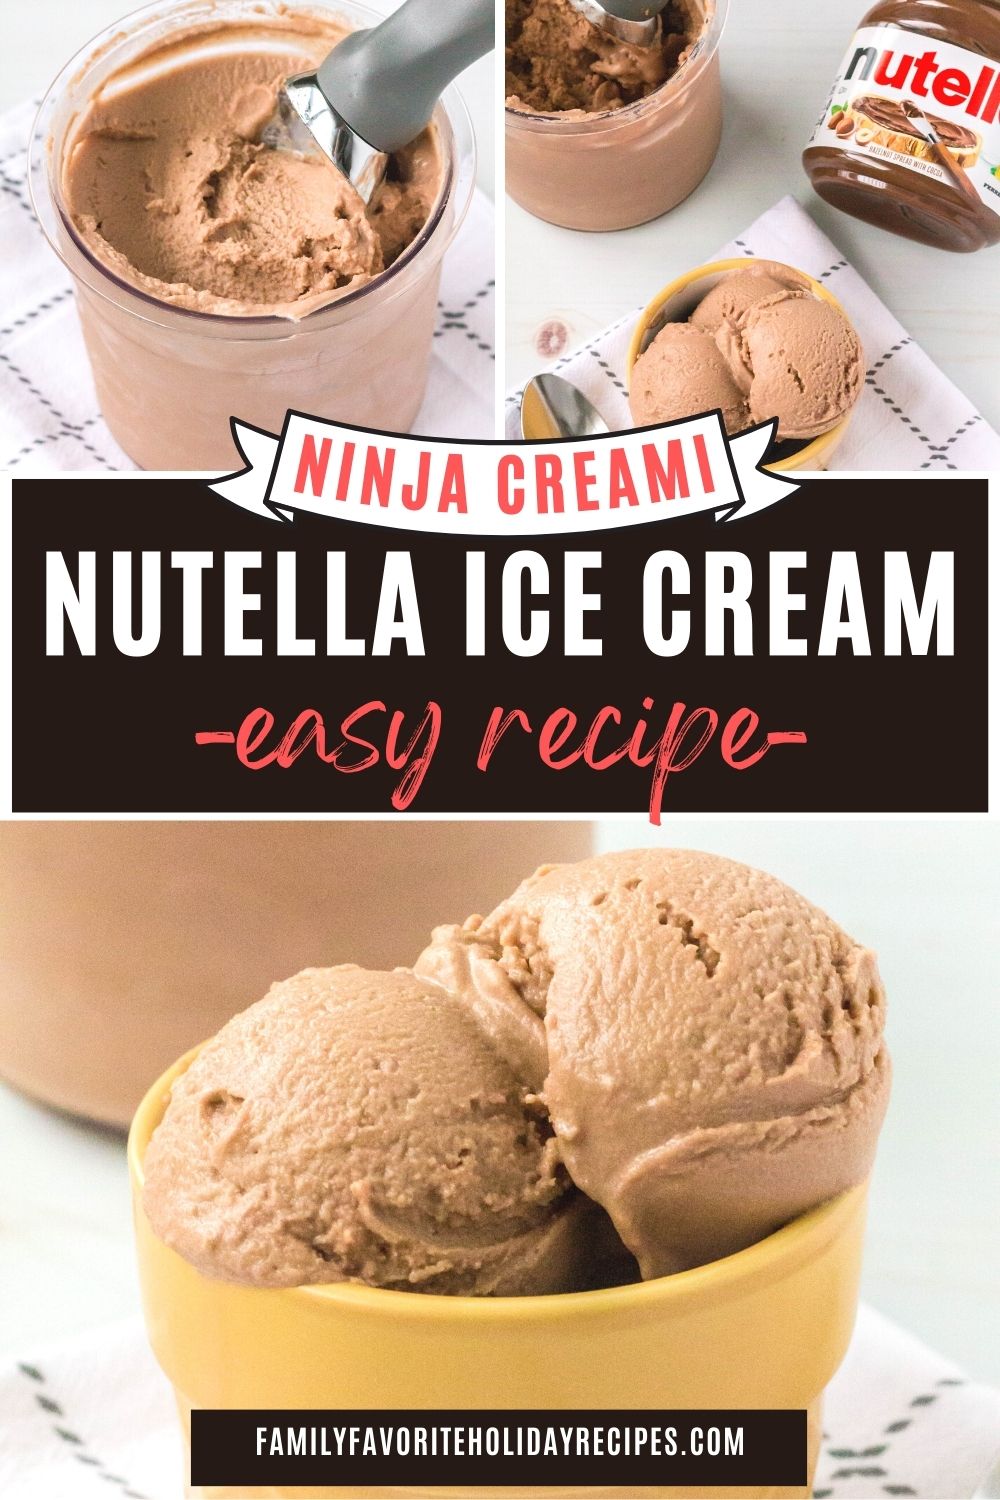 collage of three images;  one shows a pint ninja creami with chocolate hazelnut ice cream, the other shows a bowl of ice cream next to a jar of nutella and the other shows a close-up of two scoops of ninja creami nutella ice cream on a plate